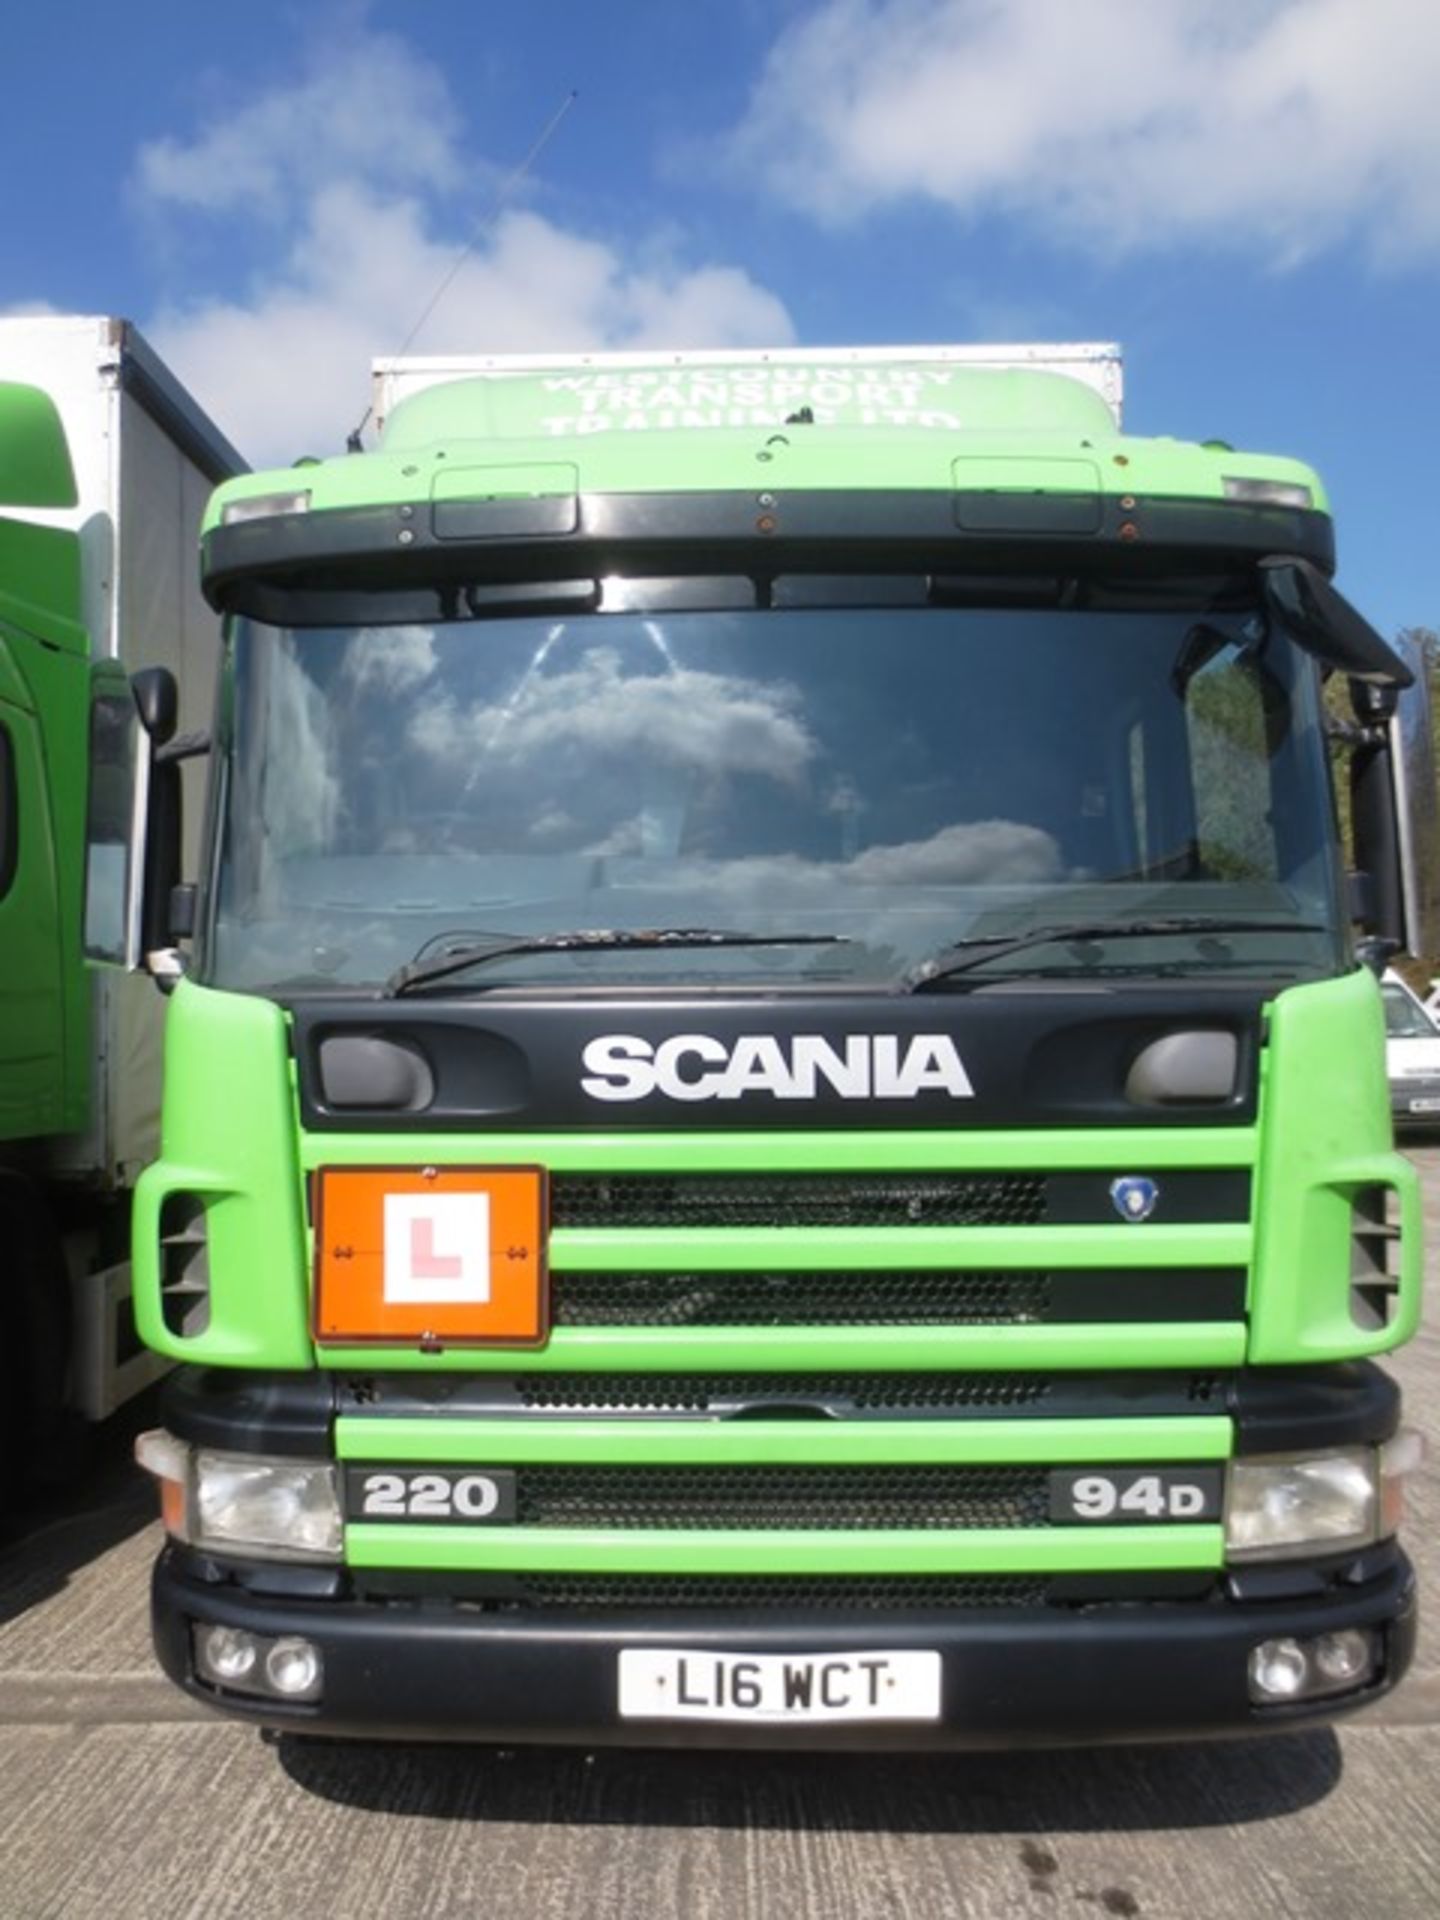 Scania 4-Series 220 94D, 8970cc diesel, curtainside sleeper cab lorry, cab type: CP19, serial no: - Image 2 of 16